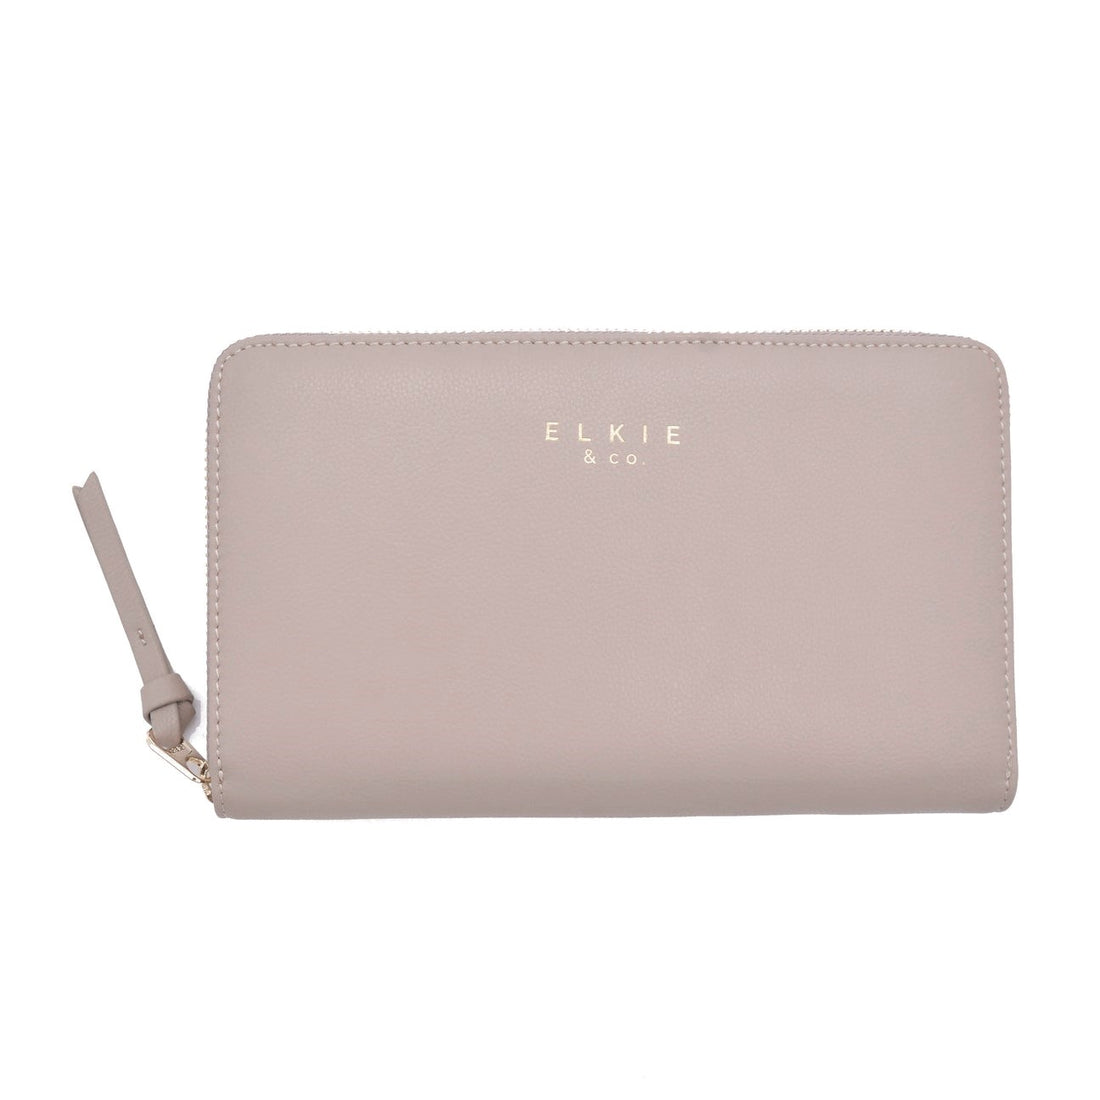 elkie taupe wallet front view on white background